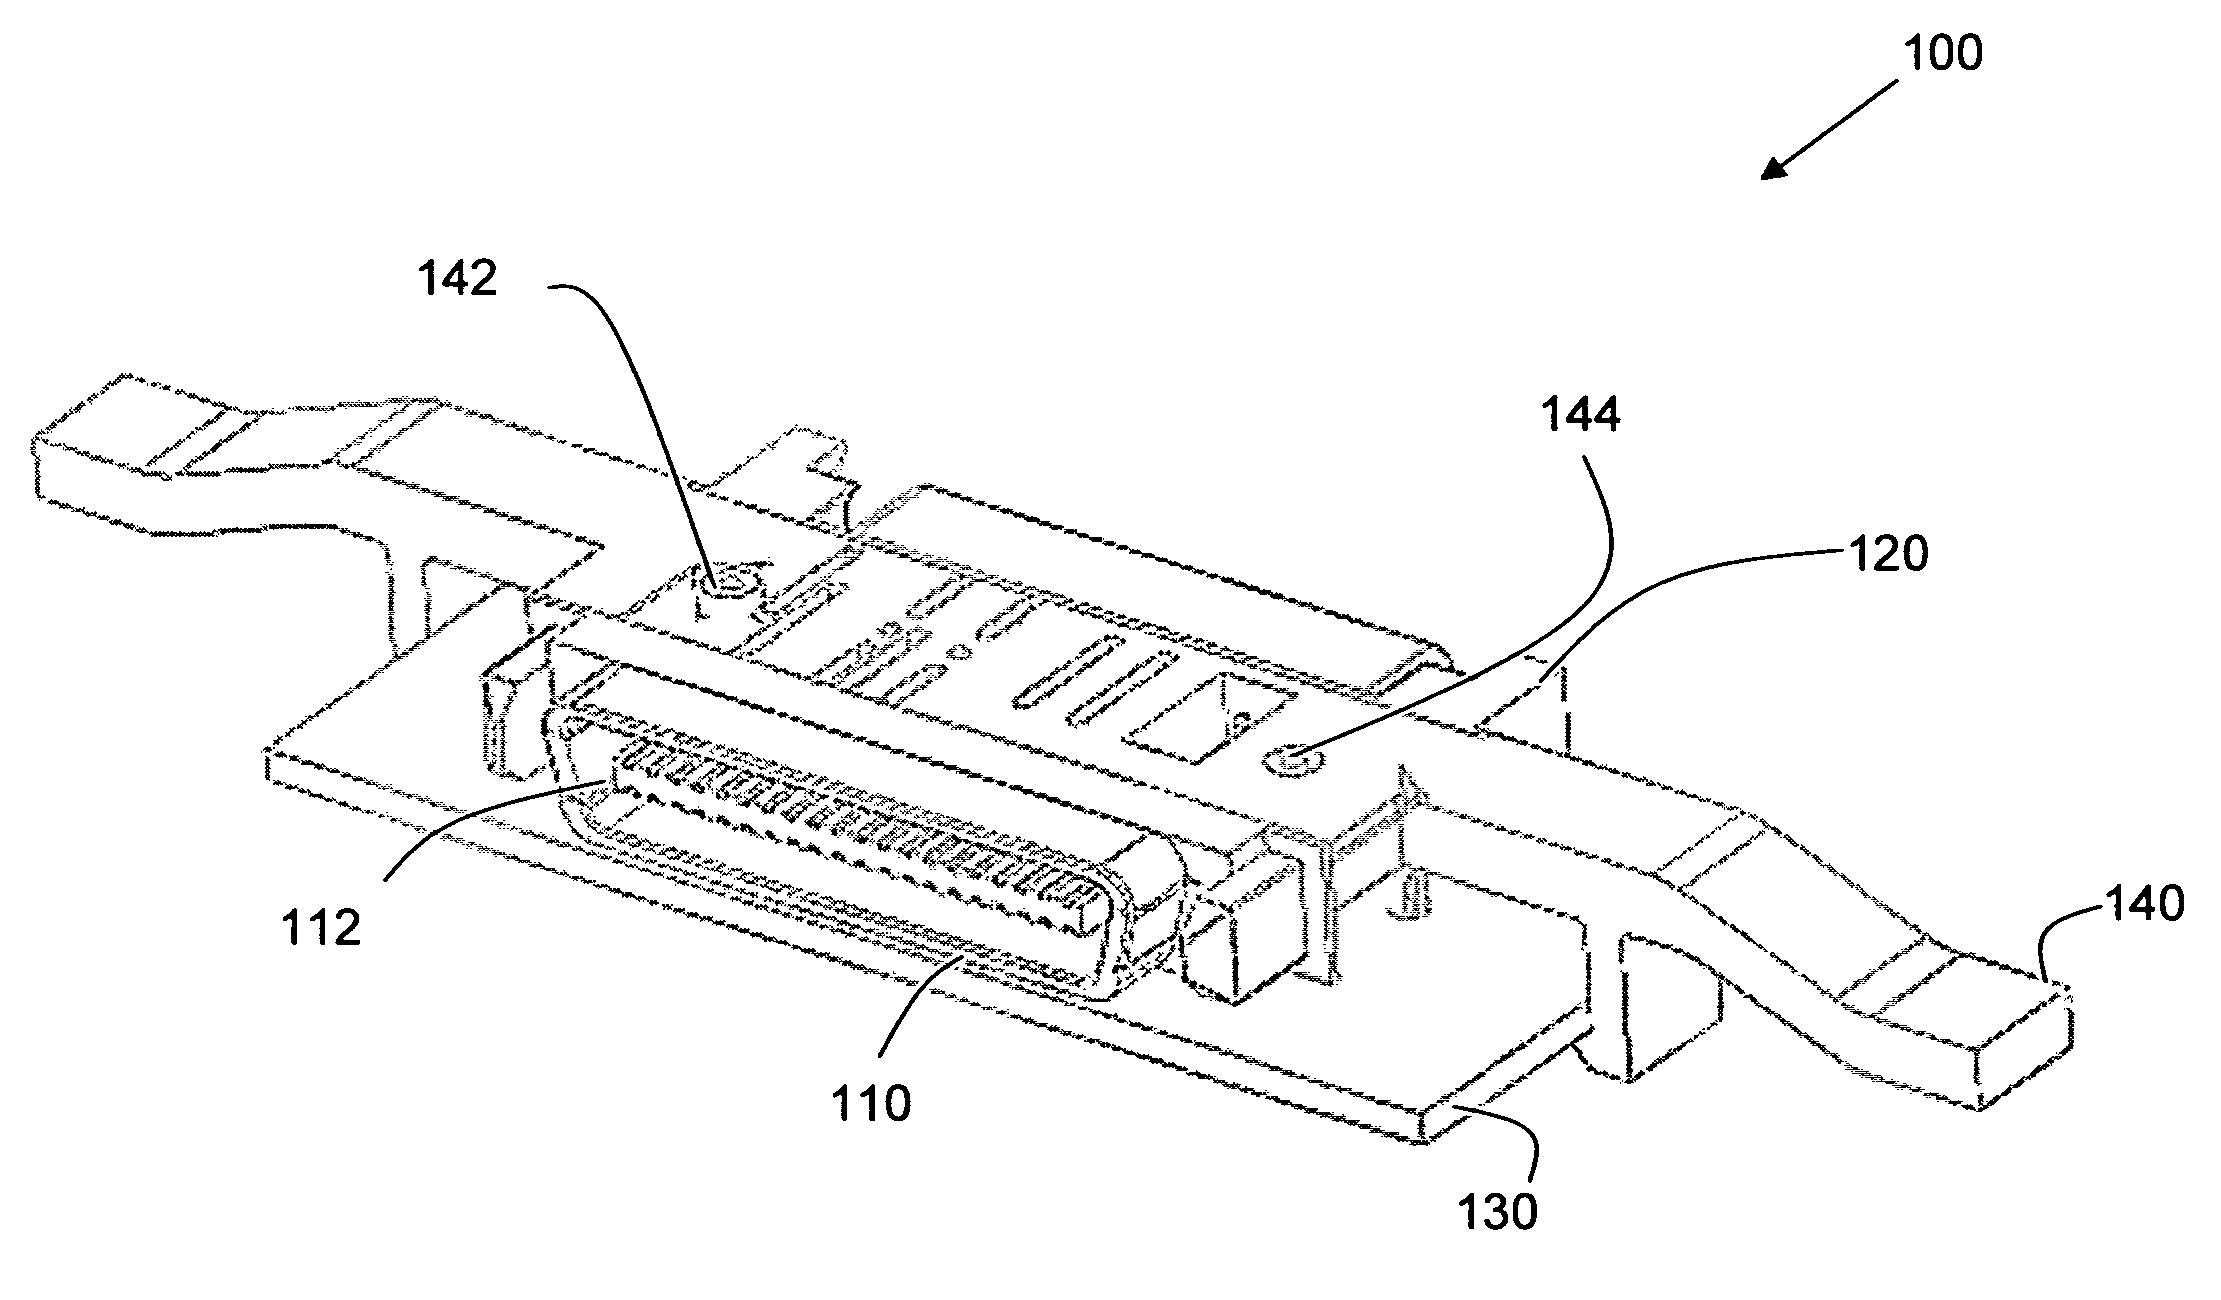 Adapter for interconnecting electrical assemblies